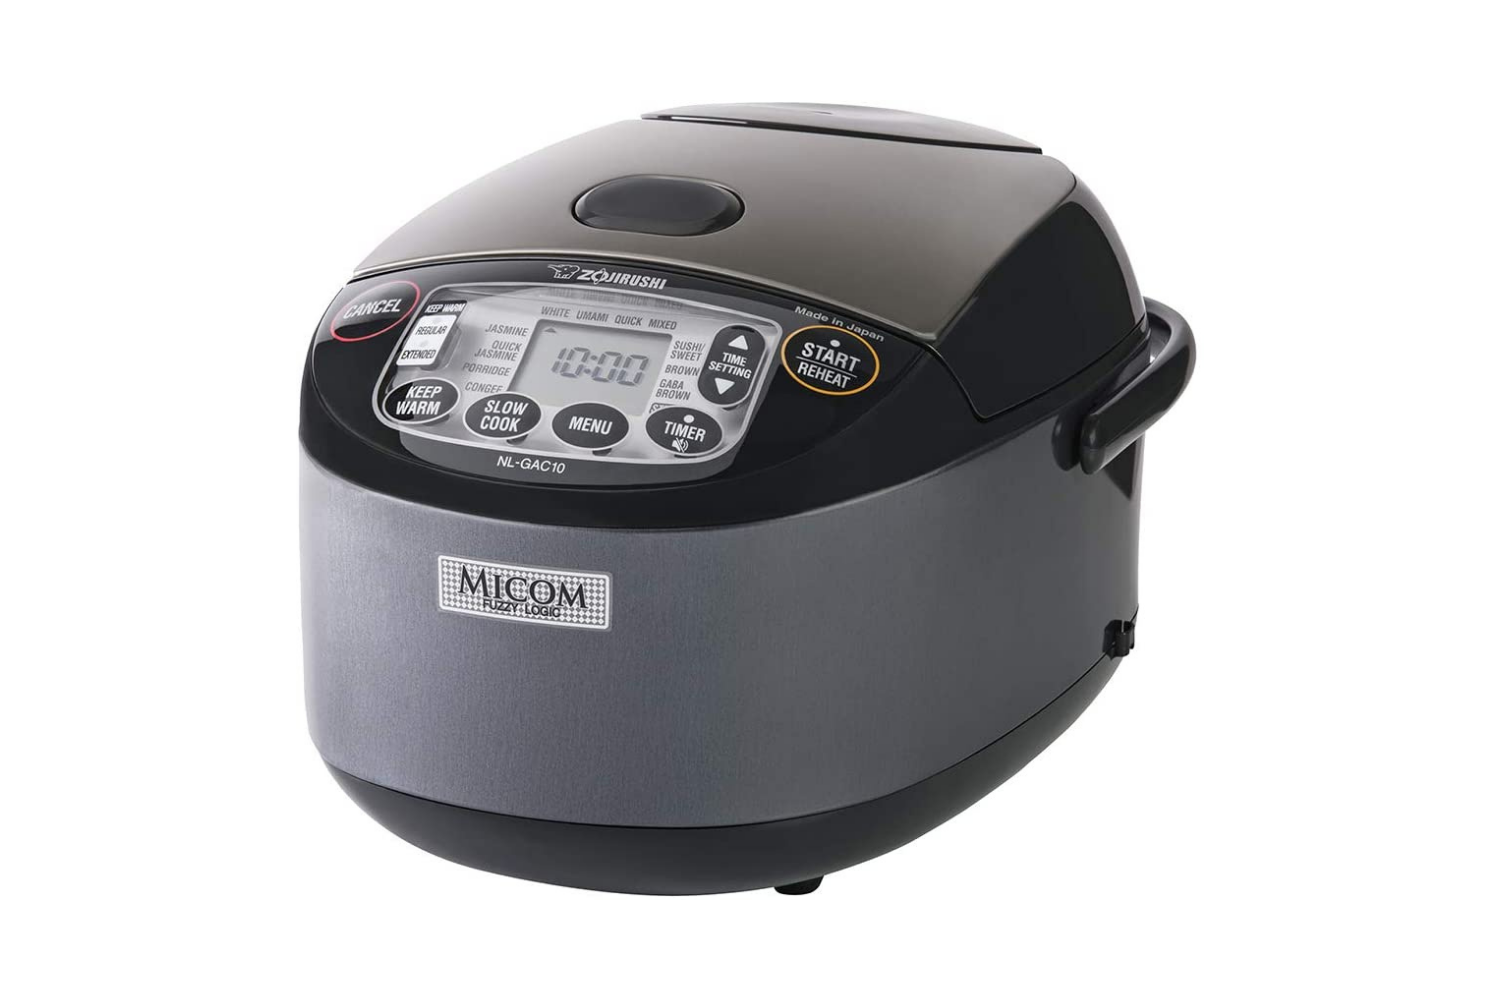 Zojirushi NL-GAC10 Rice Cooker & Warmer [Review] - YourKitchenTime